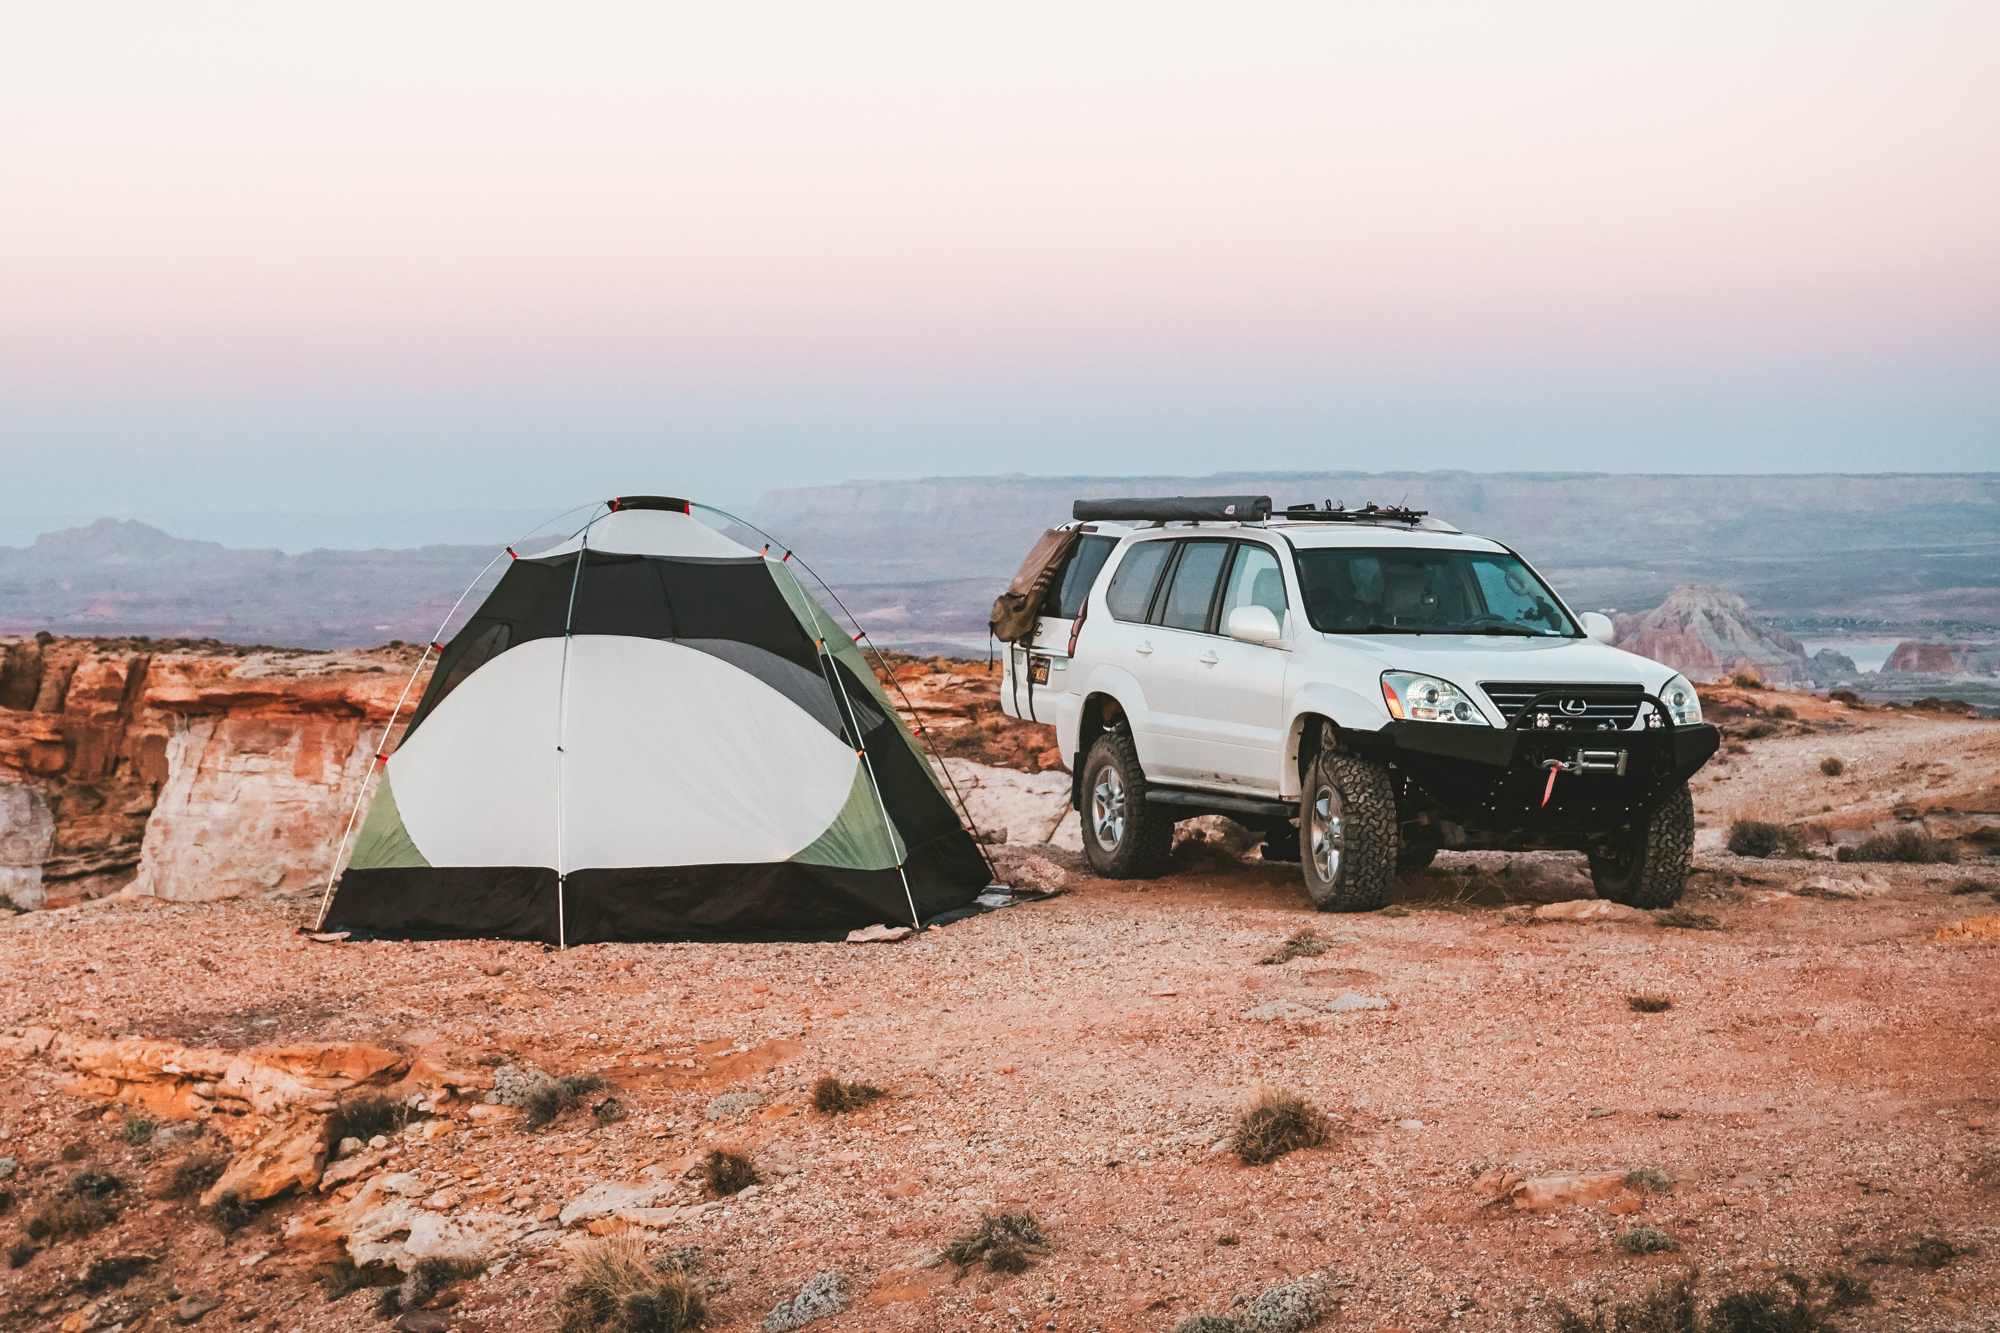 The Best Car Camping Gear for Any Season - The Manual